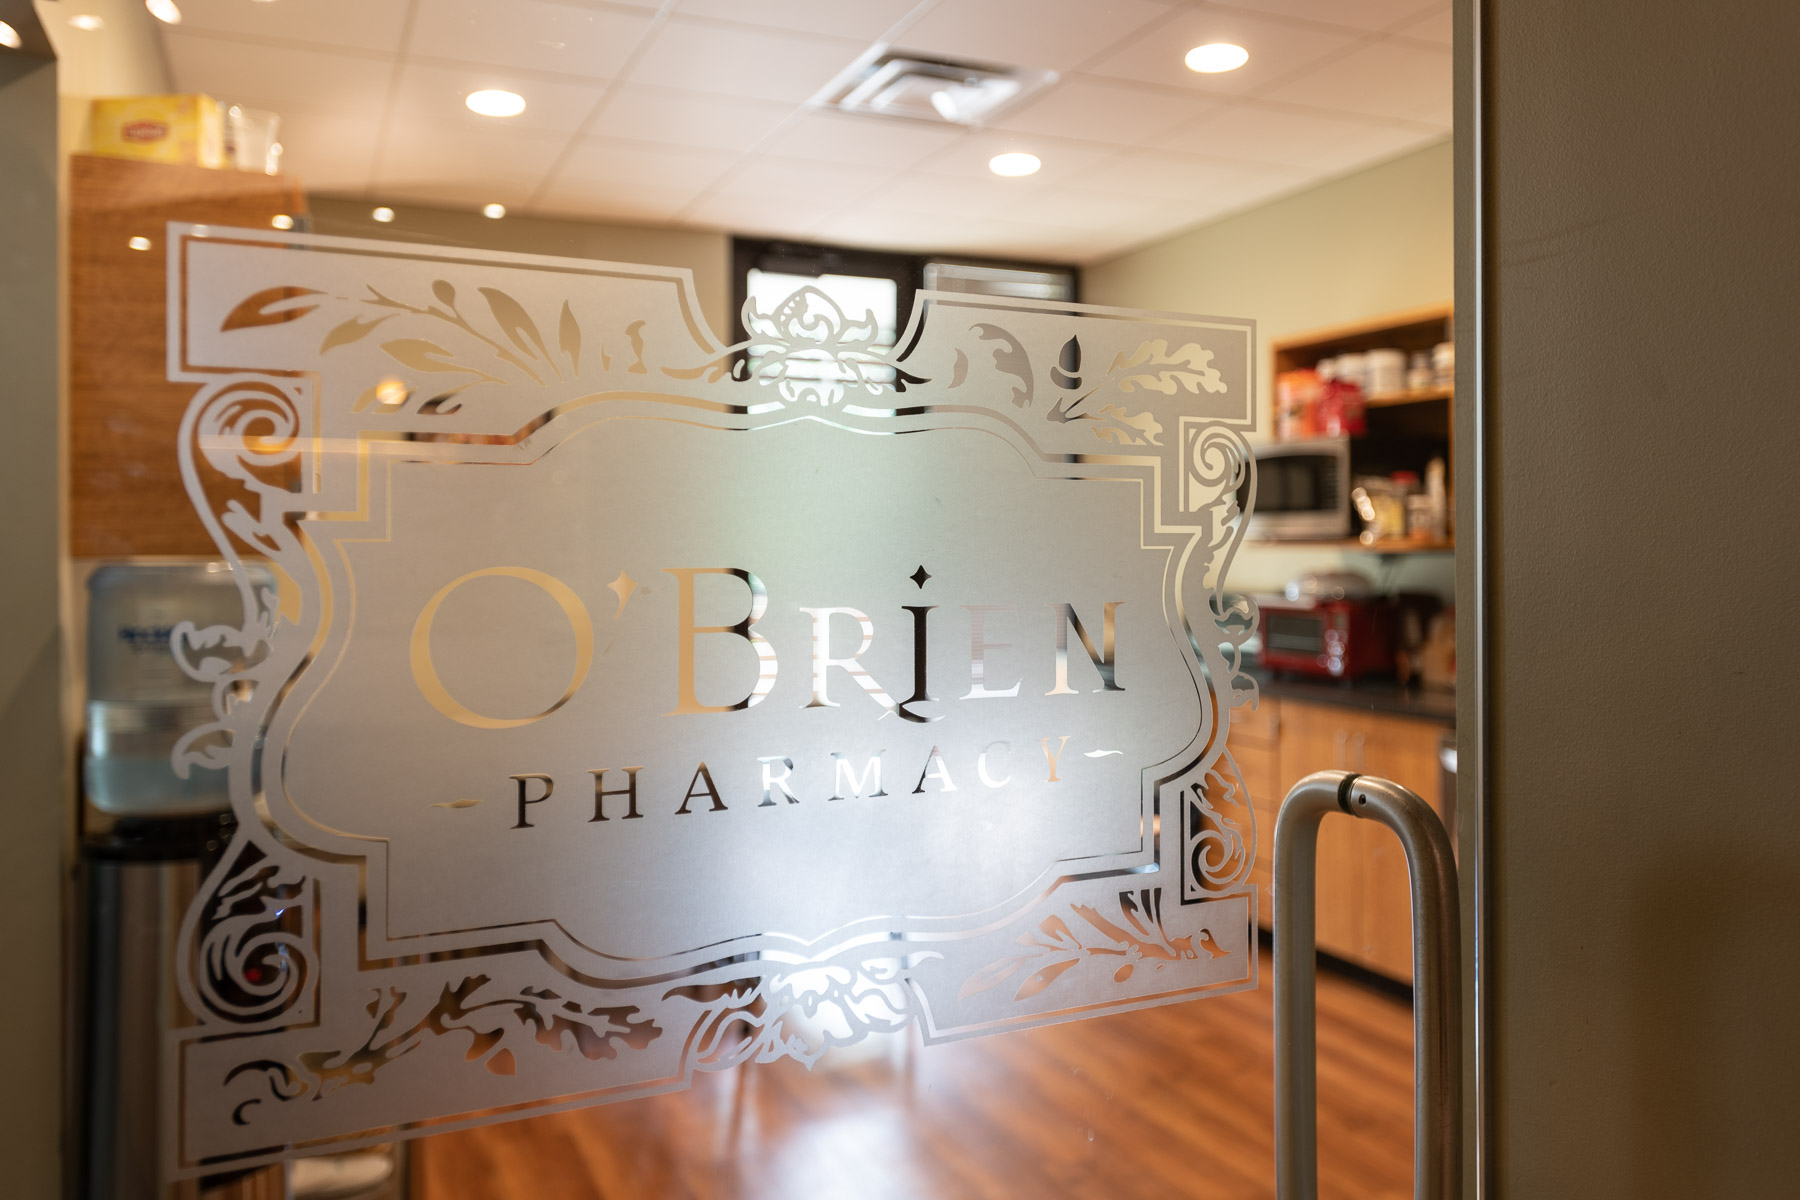 ABOUT US: O'Brien Pharmacy